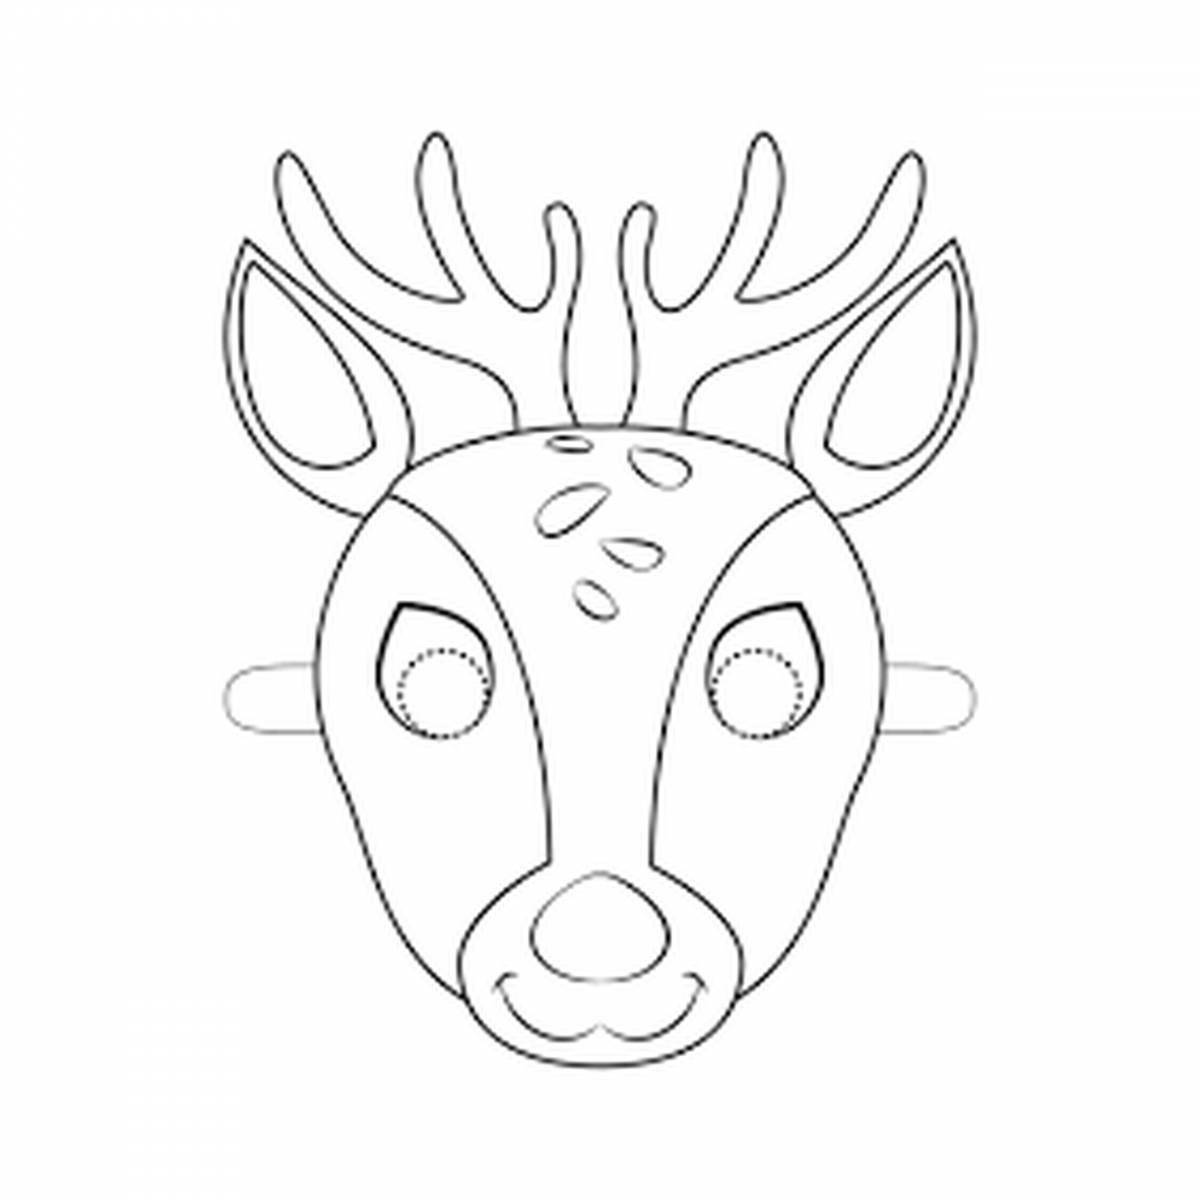 Colourful animal mask coloring page